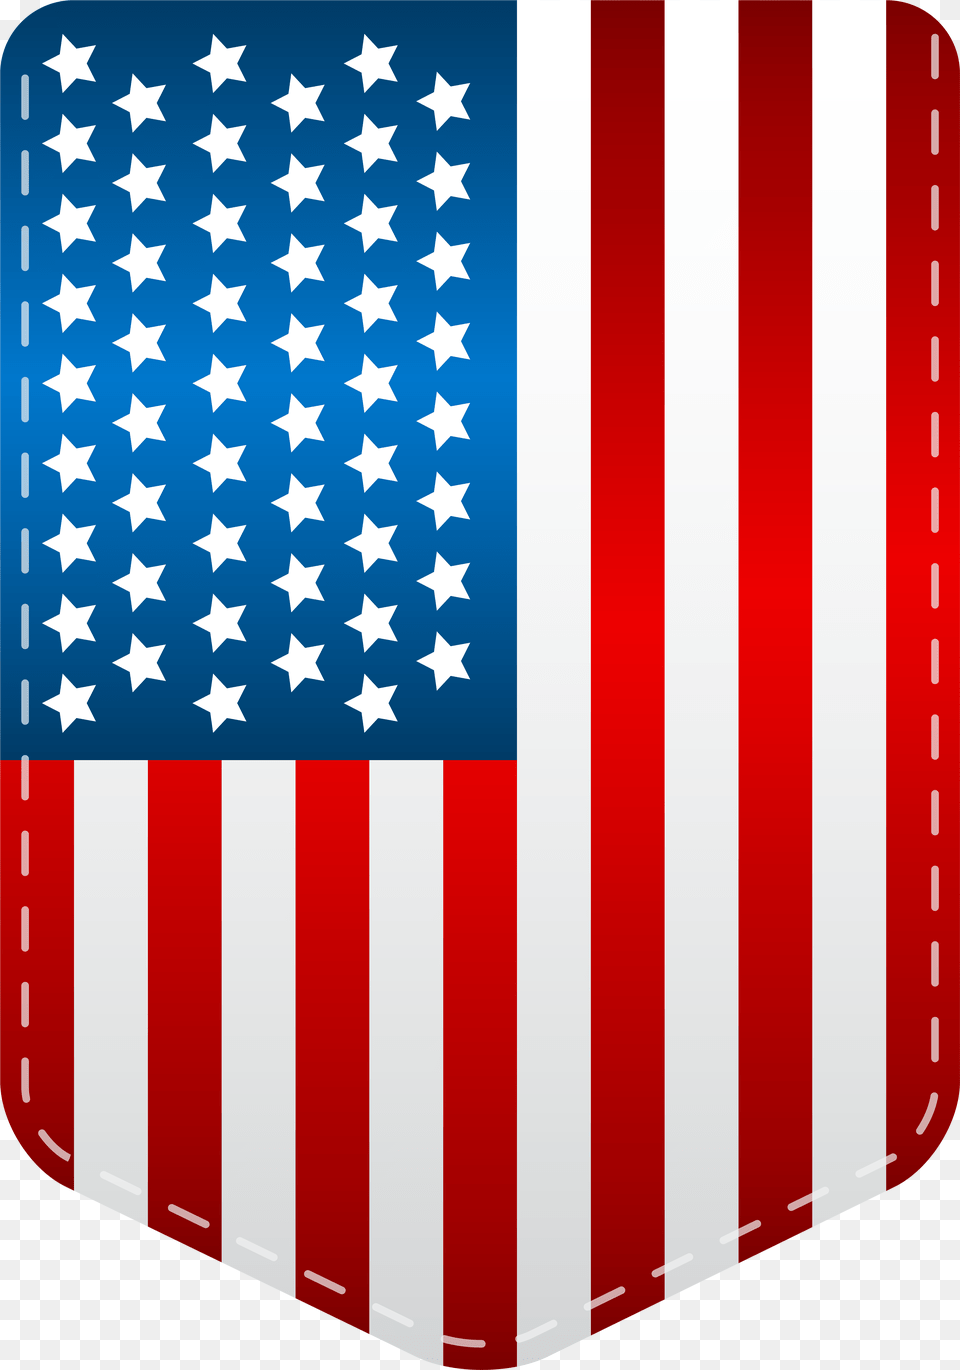 United States Captain America Eu Us Privacy Shield American Flag Shield, American Flag Free Transparent Png